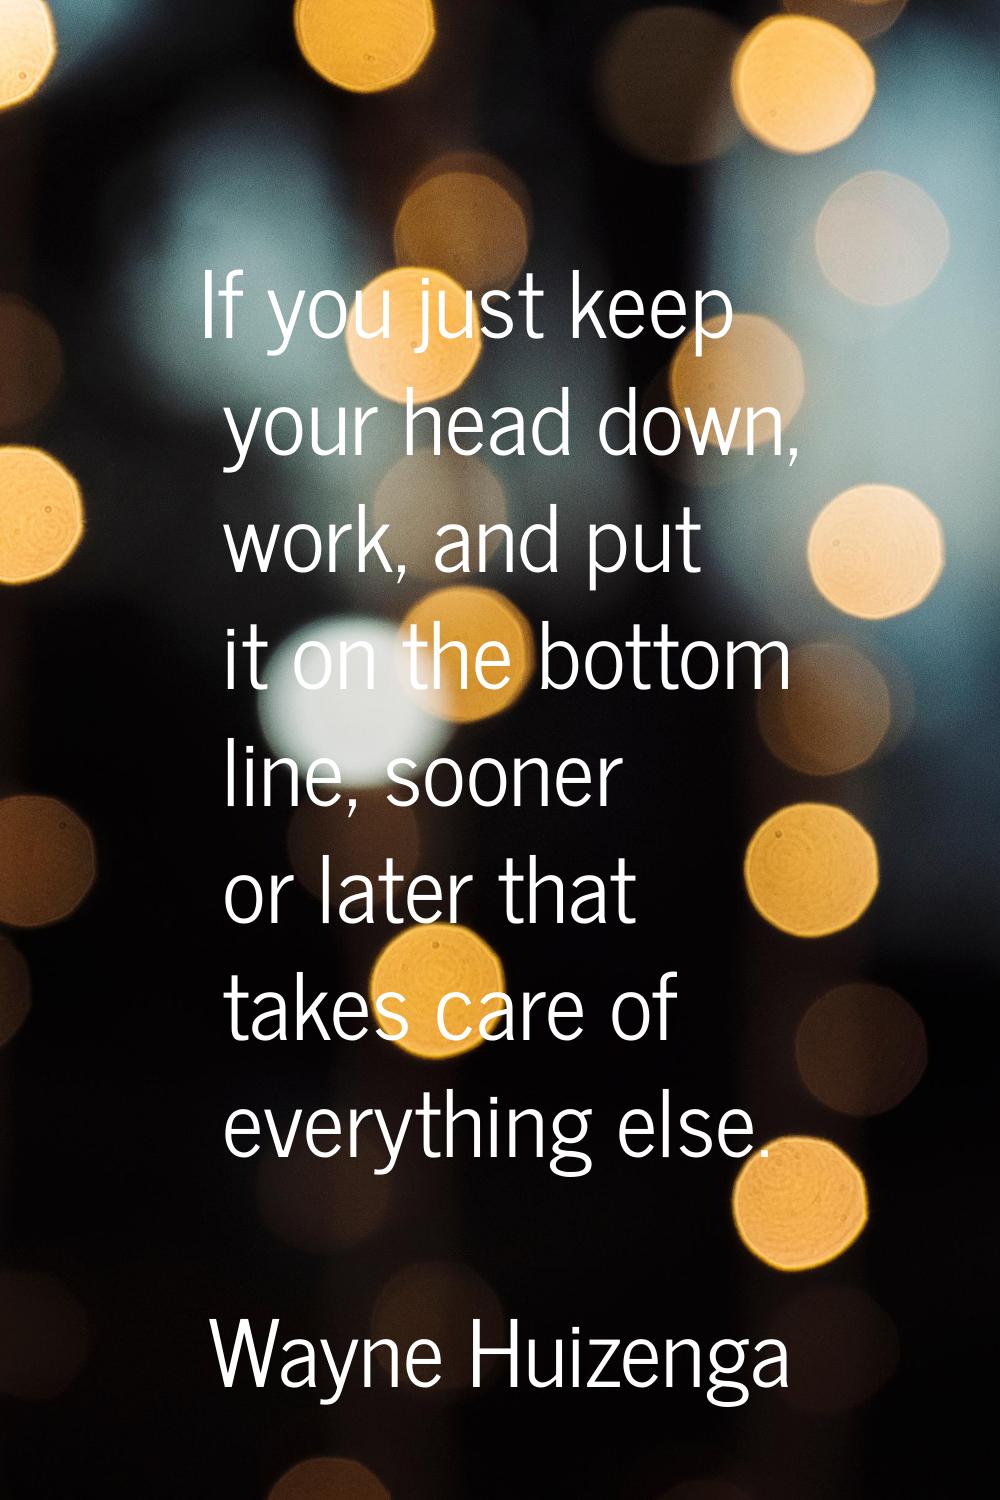 If you just keep your head down, work, and put it on the bottom line, sooner or later that takes ca